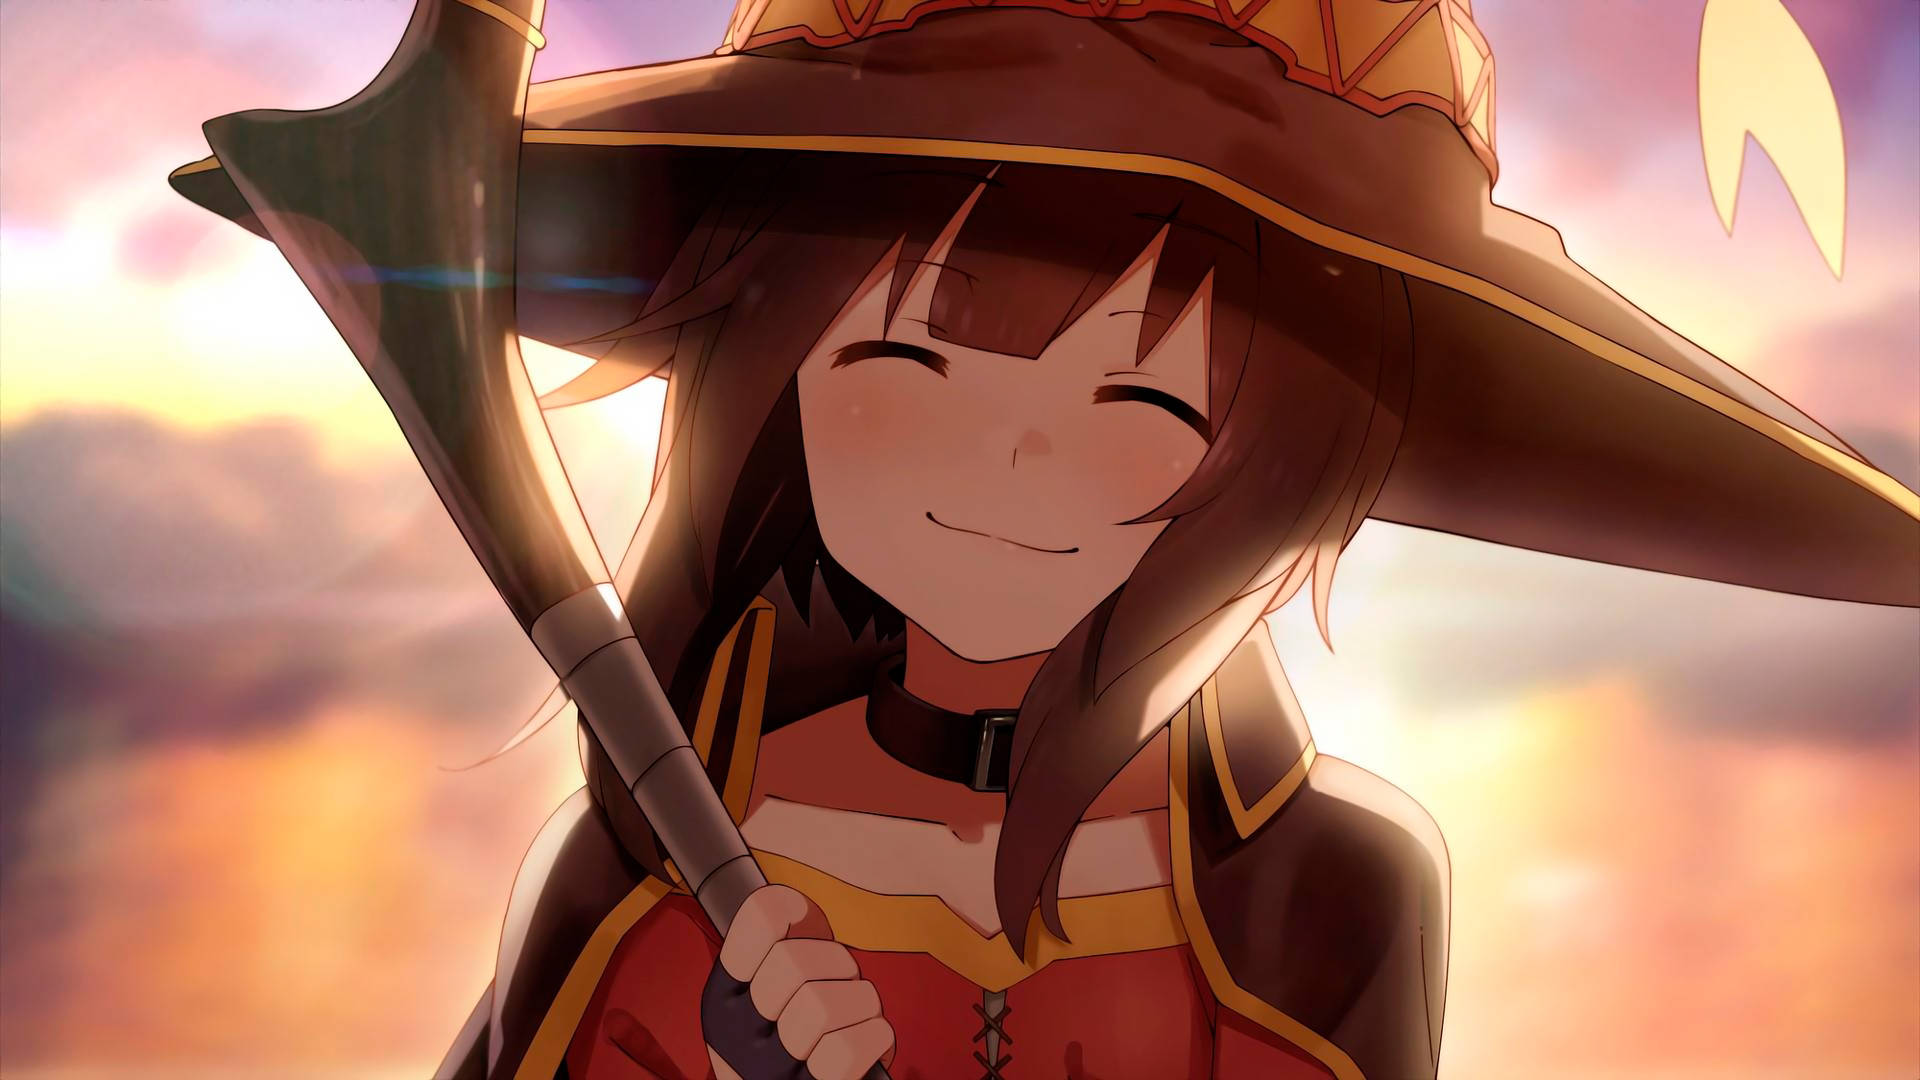 Megumin 2560X1440 Wallpaper and Background Image